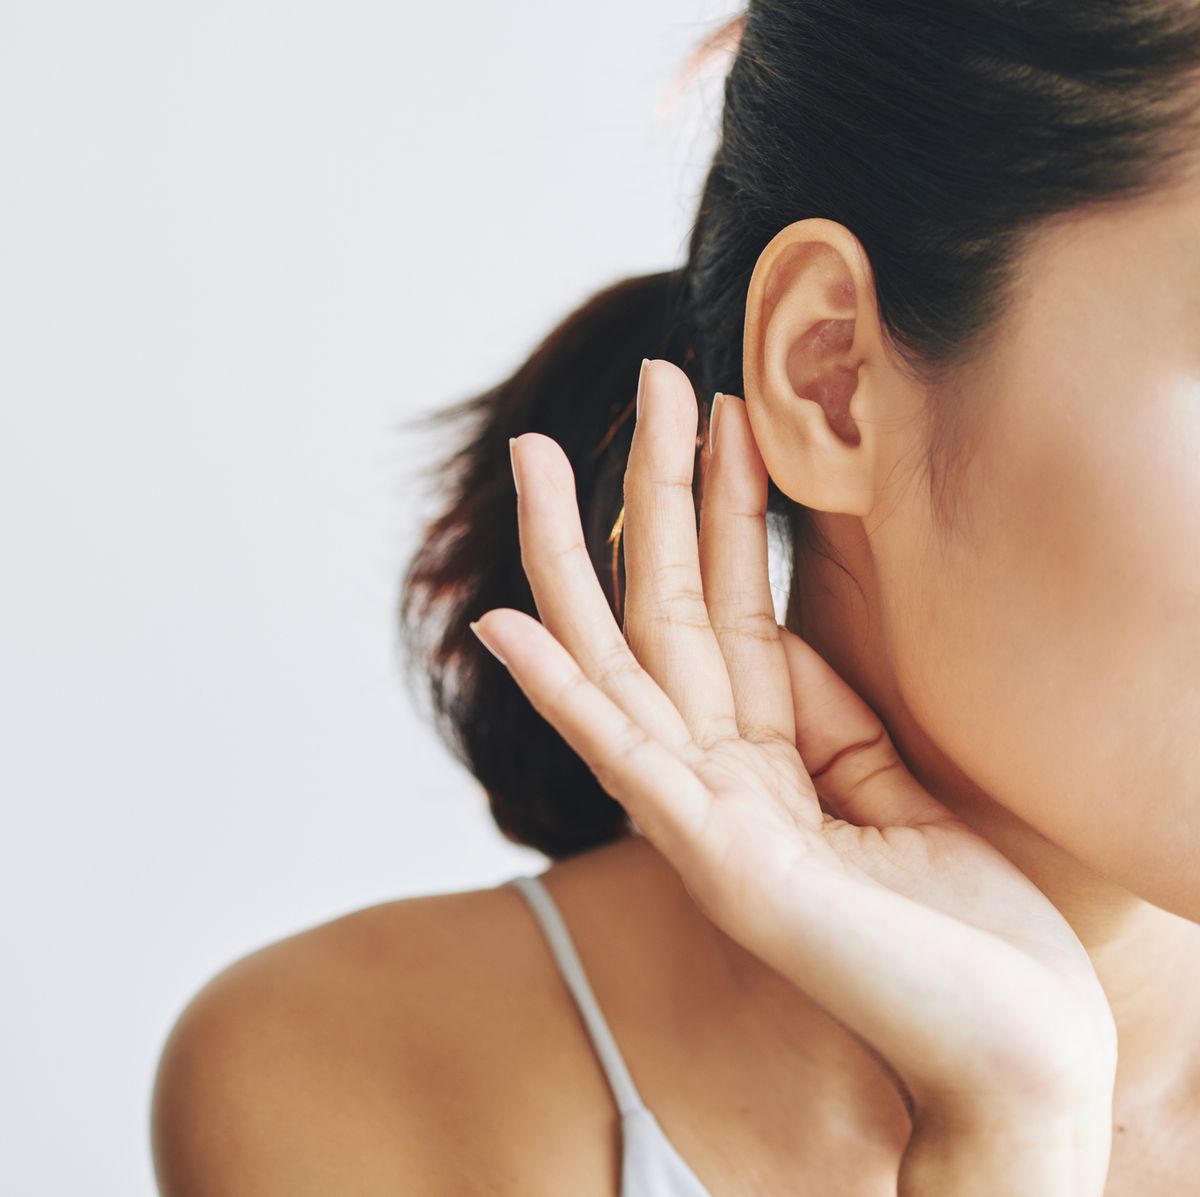 høst Udrydde betyder Why Are My Ears Ringing? - 9 Tinnitus Causes and How to Treat It